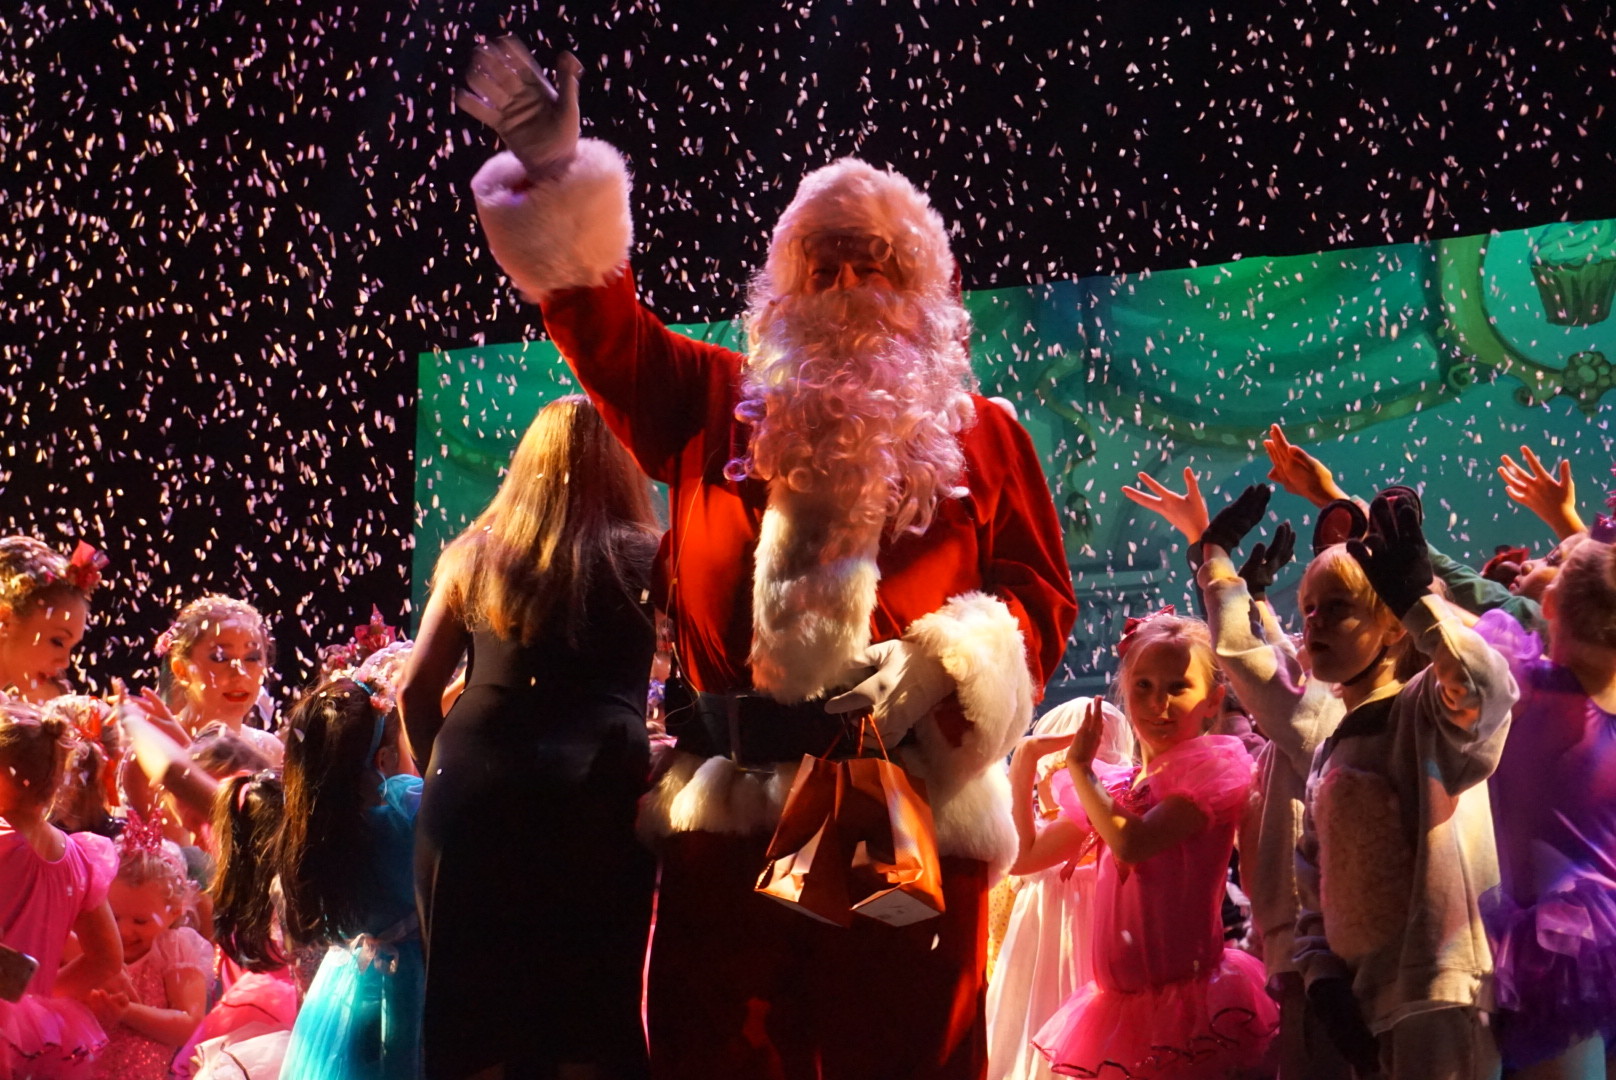 Santa Claus pays a surprise visit to the audience and performers just before curtain call